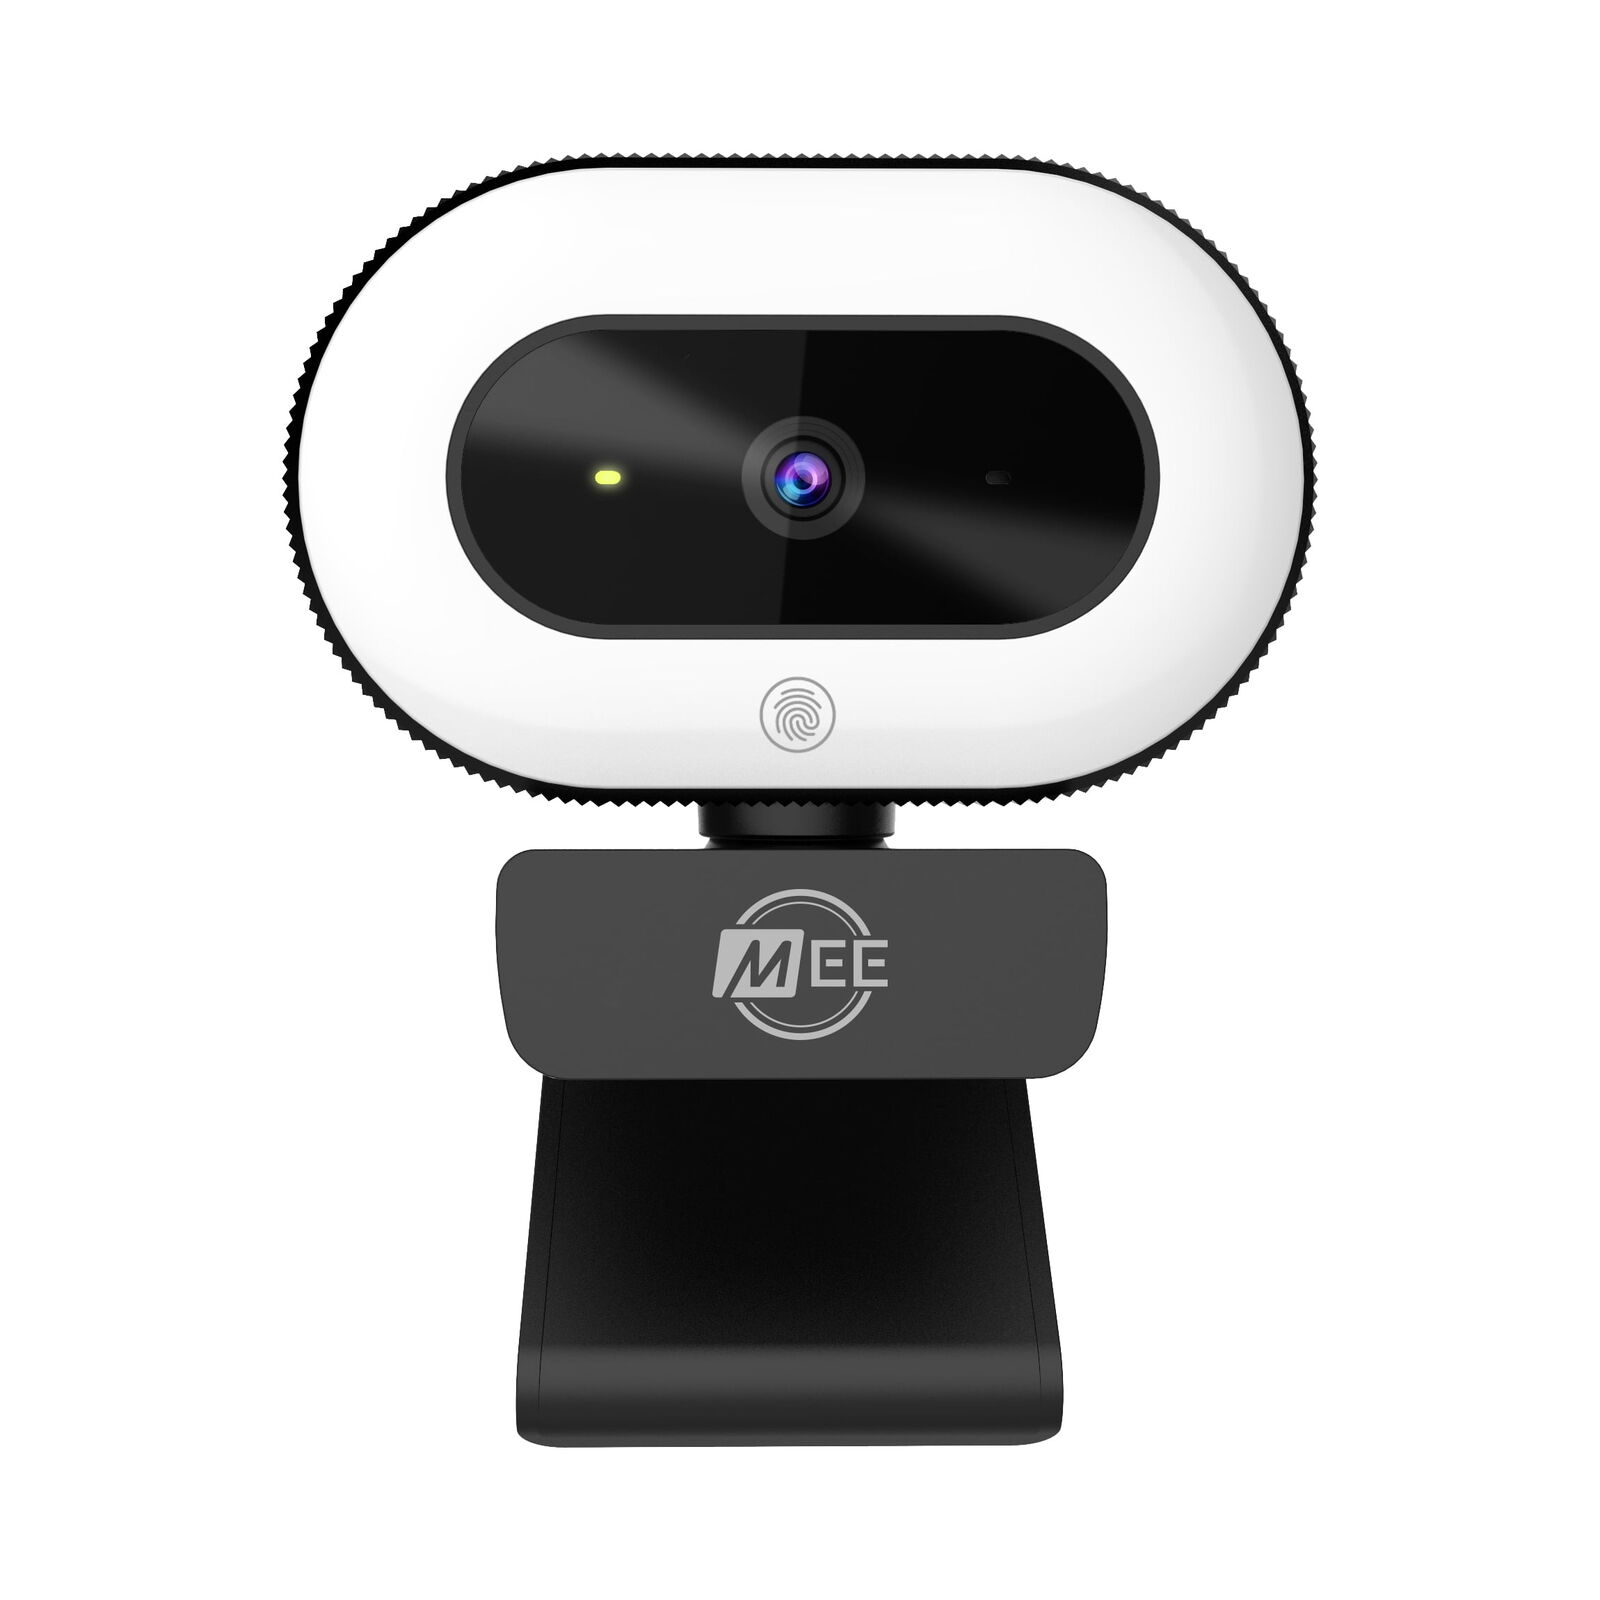 1080p HD USB Webcam with Built-In LED Light, Autofocus, and Microphone